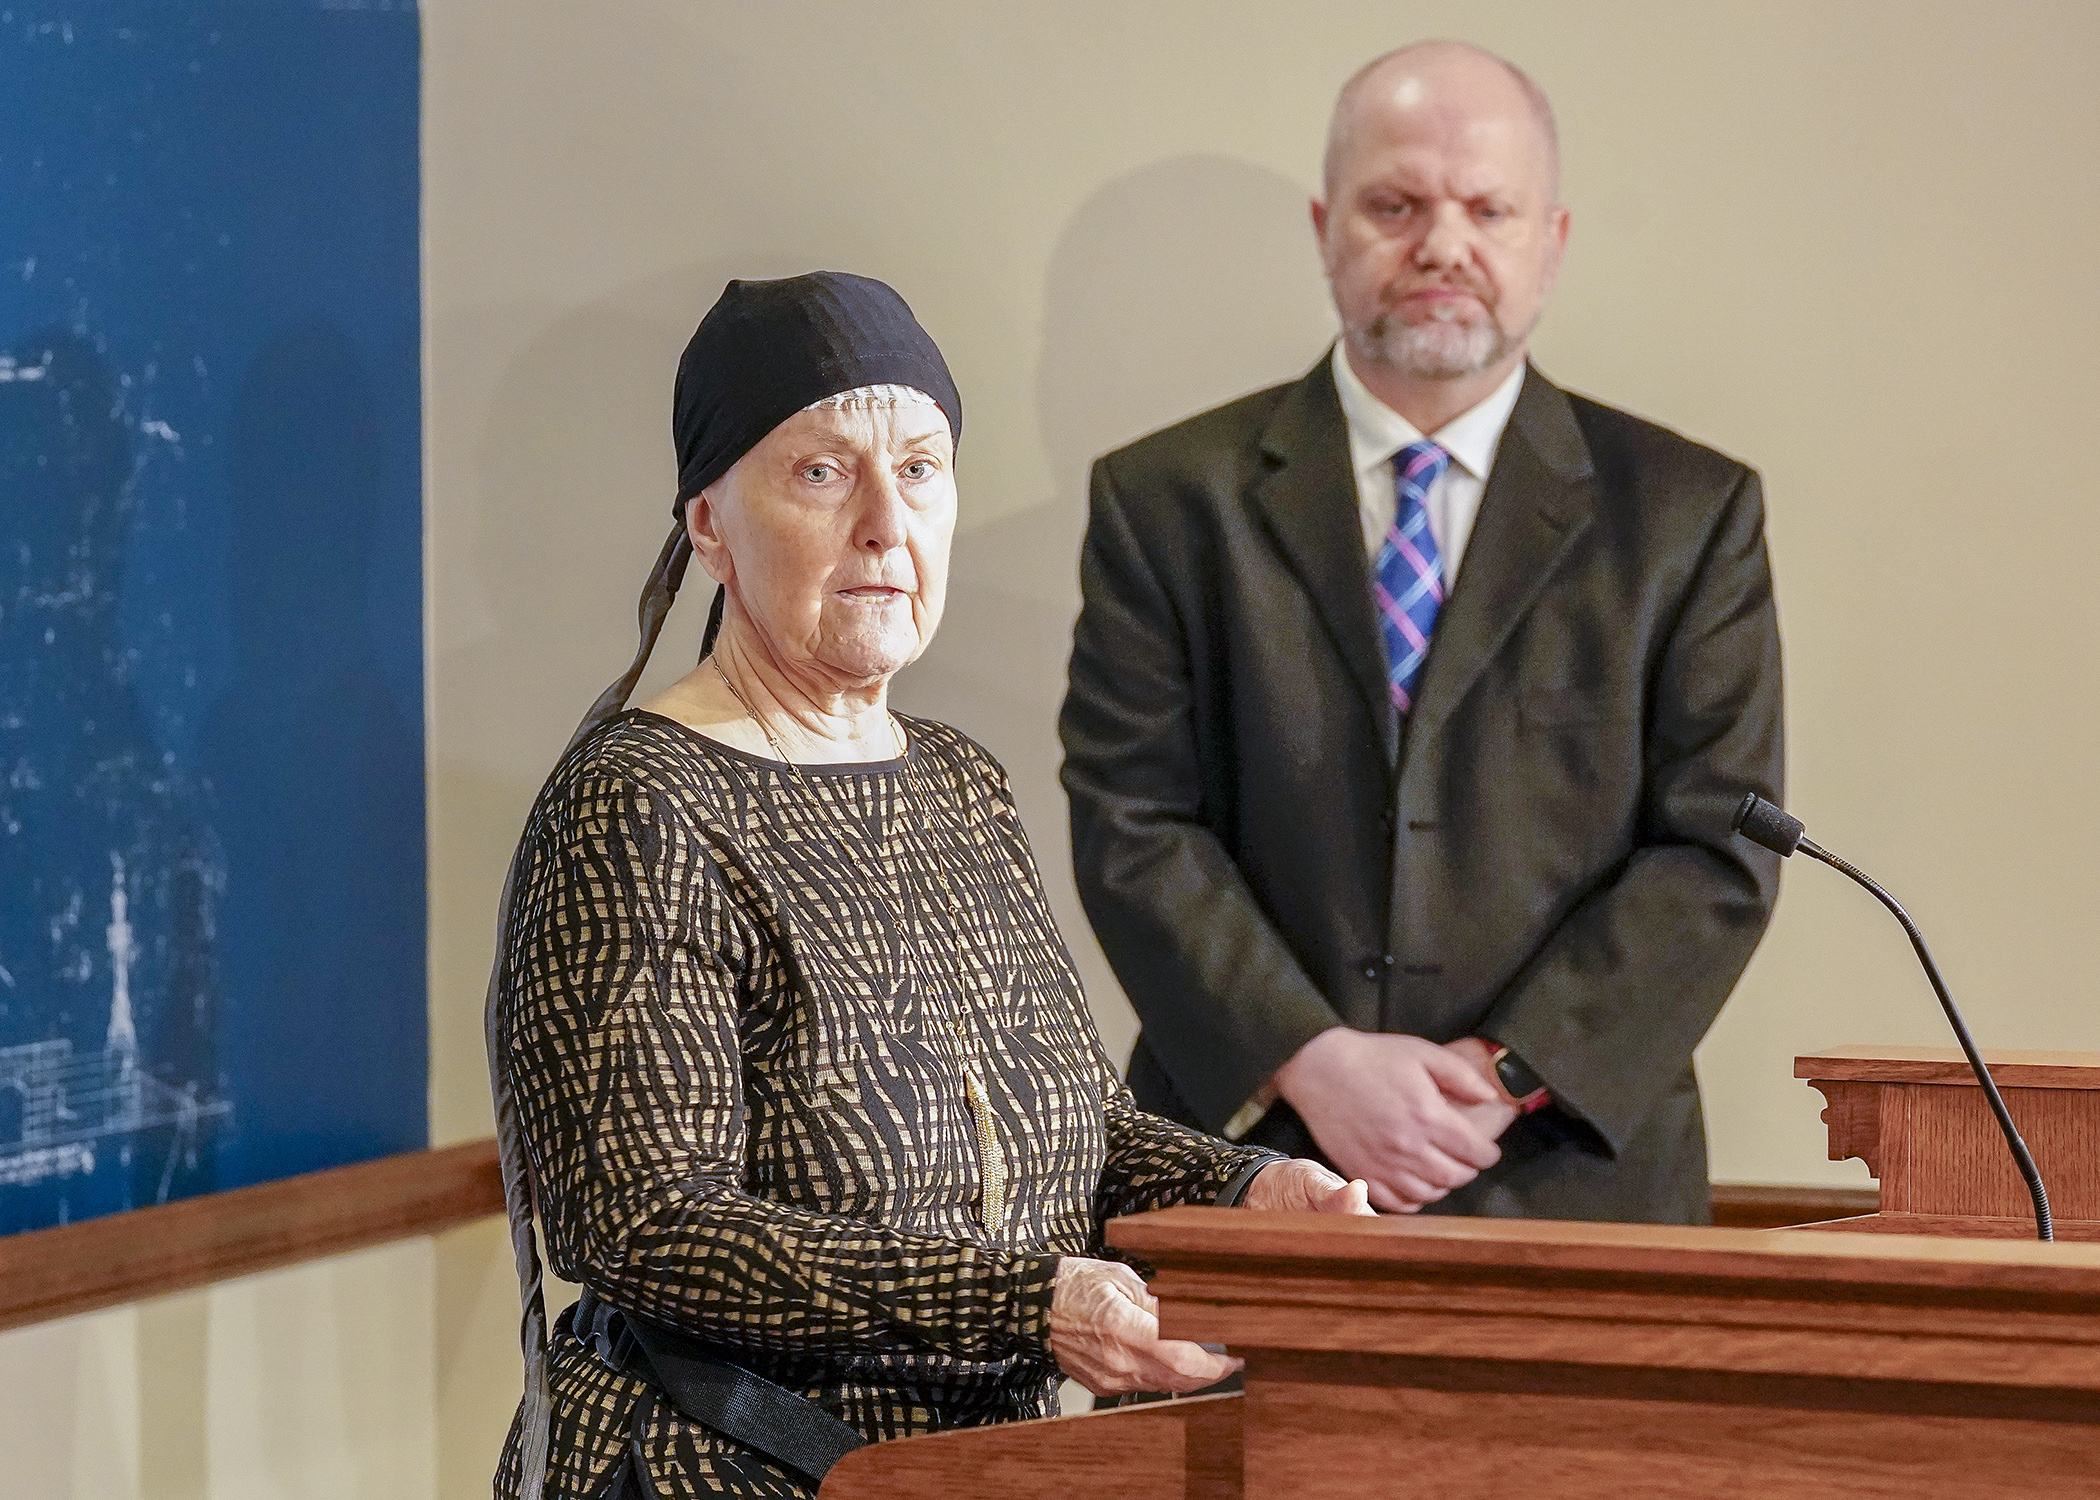 Nancy Uden, who has glioblastoma multiforme, a very aggressive form of malignant brain cancer, speaks at a Jan. 25 press conference in support of HF1930, the End-of-Life Option Act. Rep. Mike Freiberg, behind, is the bill sponsor. (Photo by Andrew VonBank)